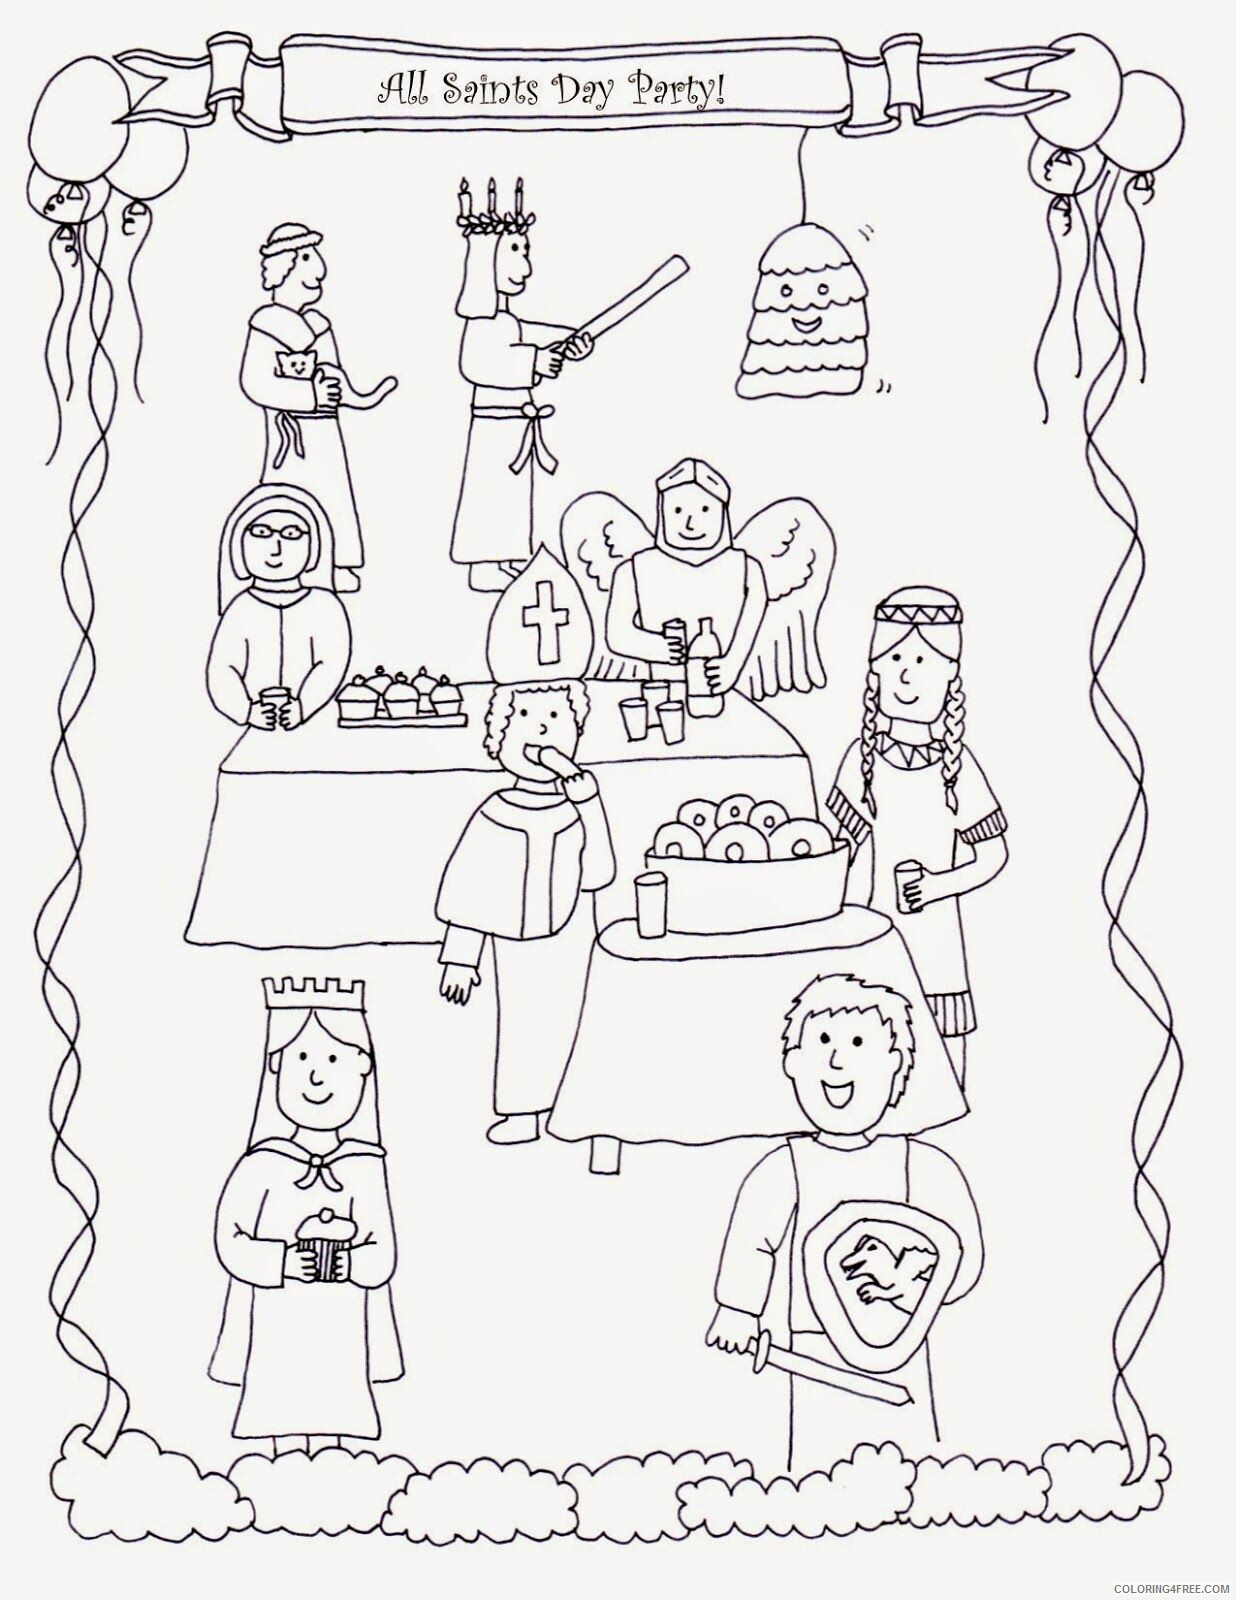 All Saints Day Coloring Pages Printable Sheets all saints day pages 2021 a 4222 Coloring4free